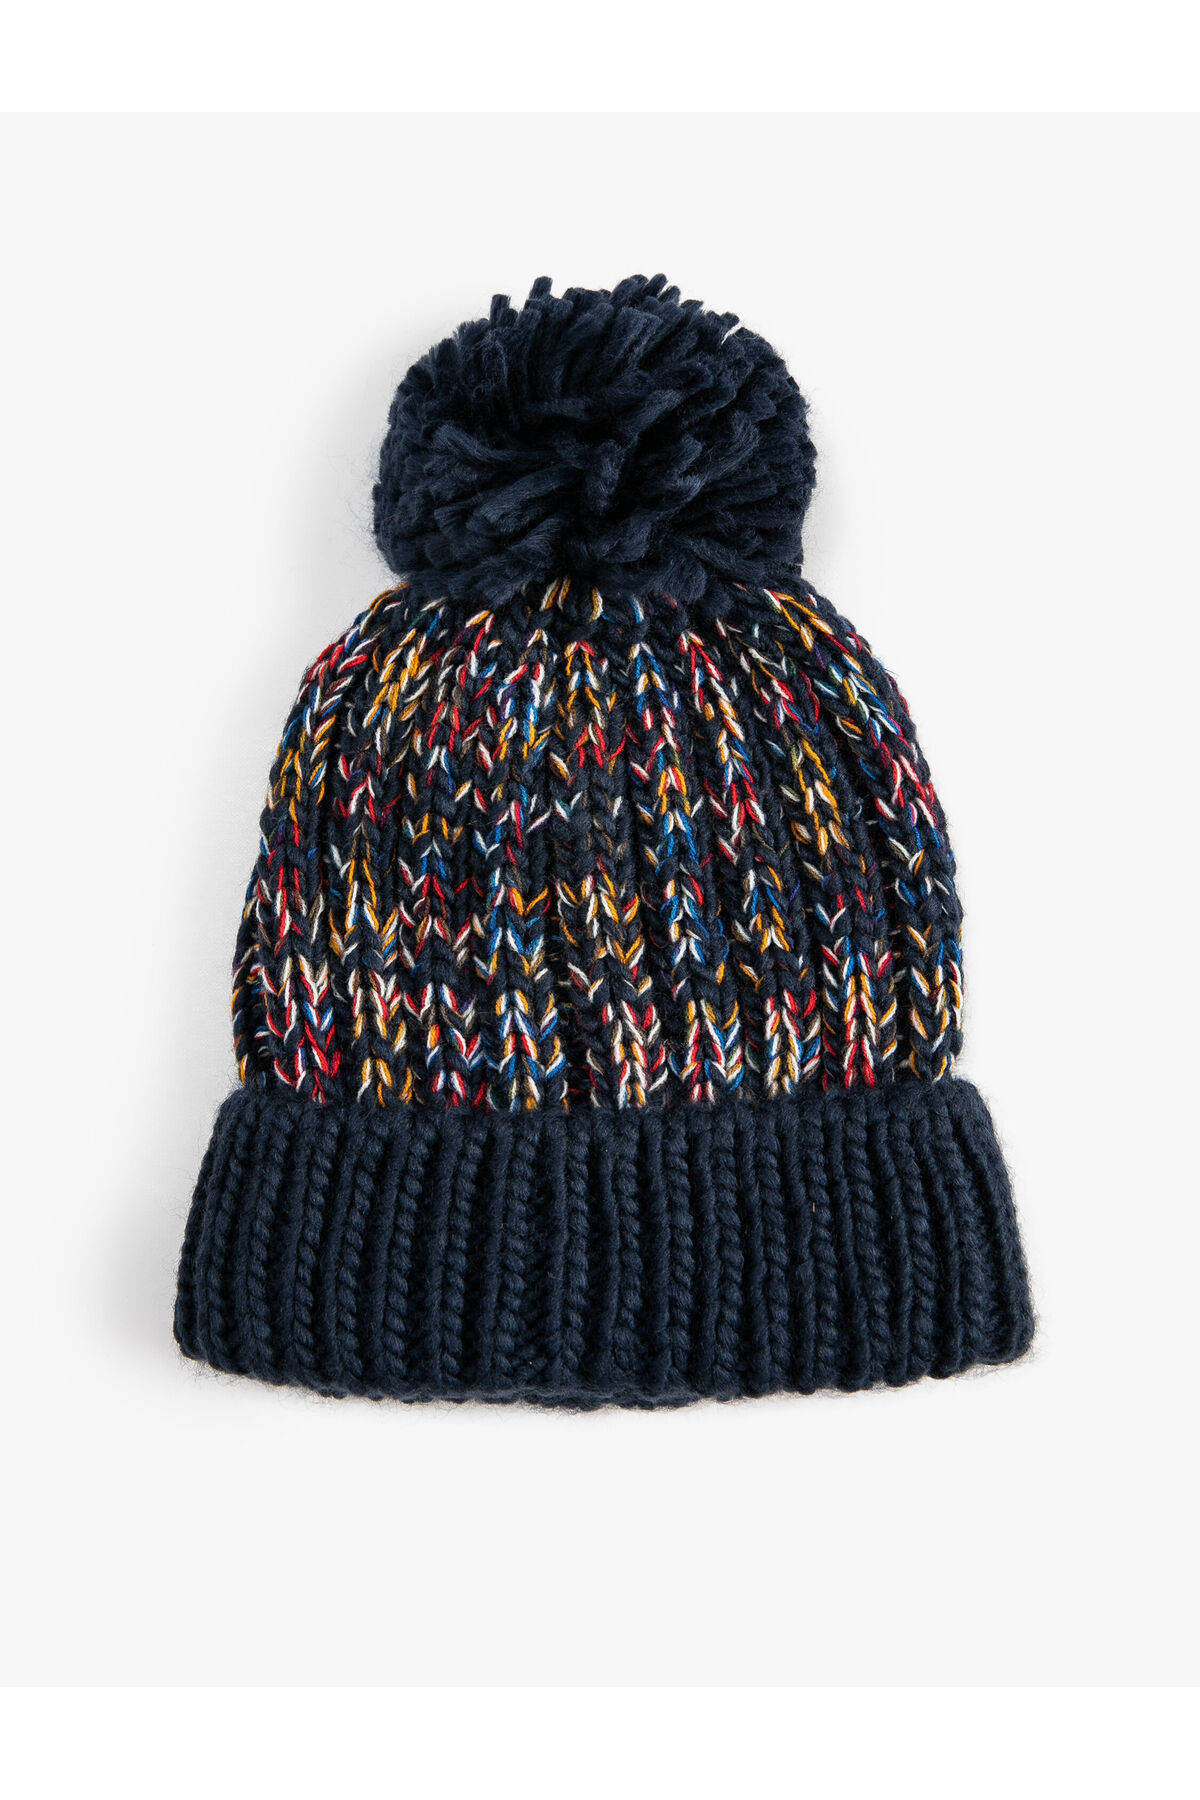 Koton Knitwear Beret with Pompom Detail